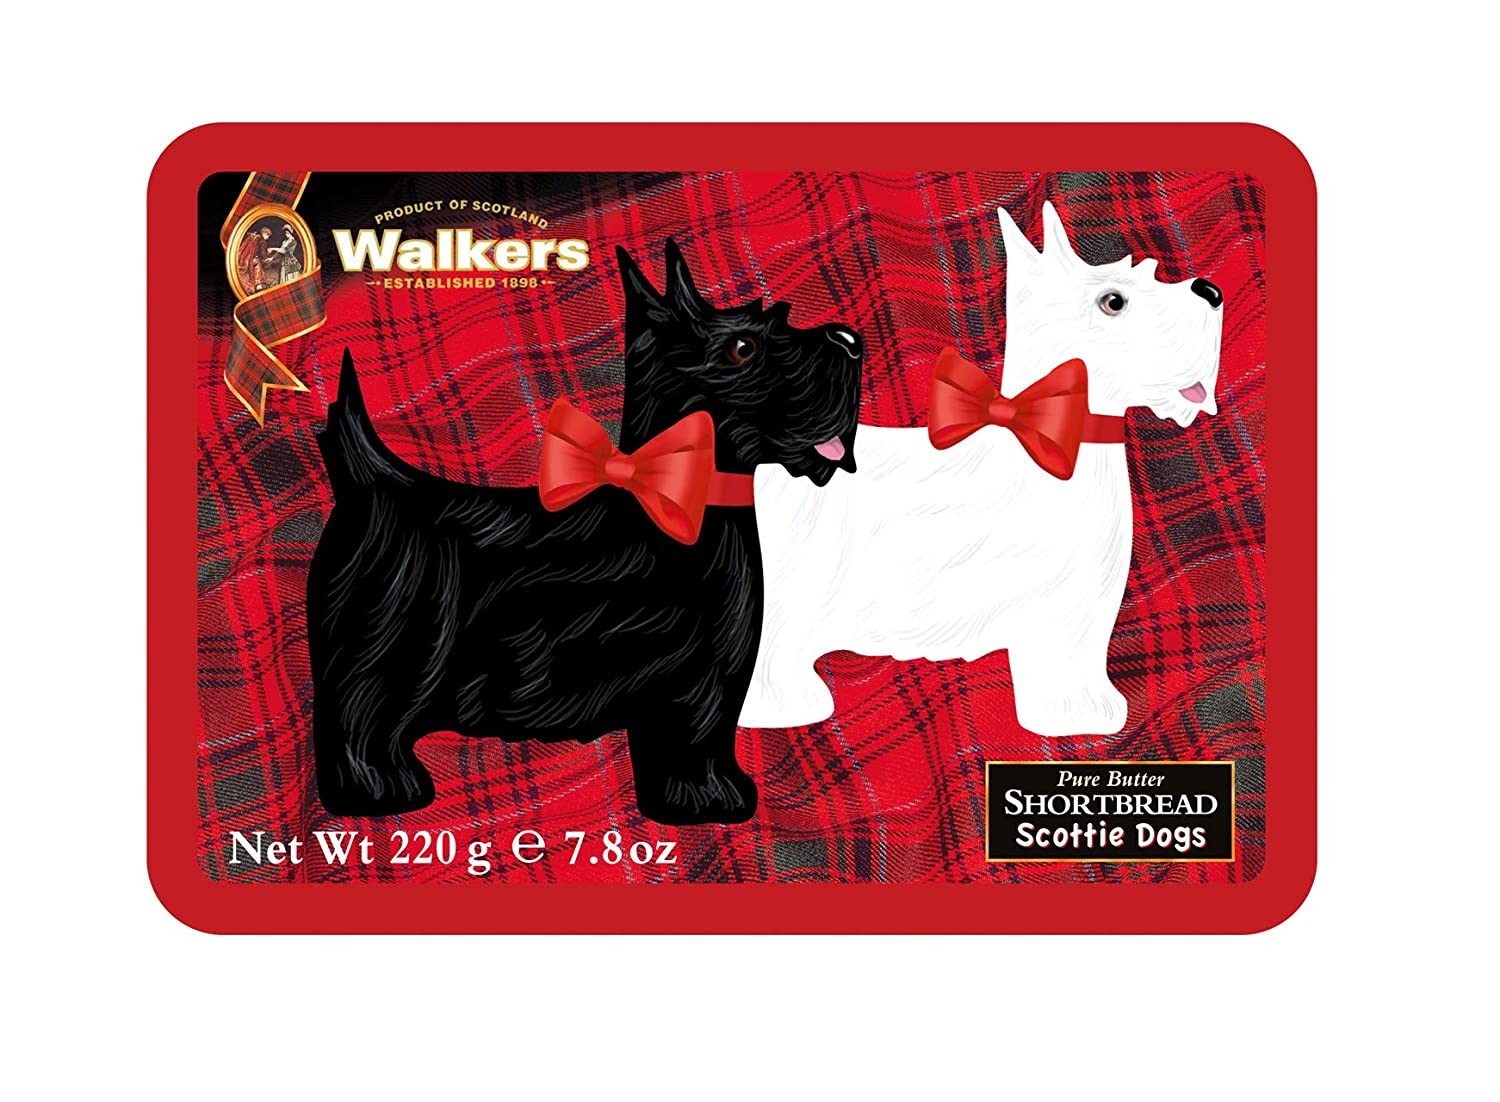 Walkers Dog-Lovers Shortbread Scottie Shaped Cookies Tin, 7.8-Ounce